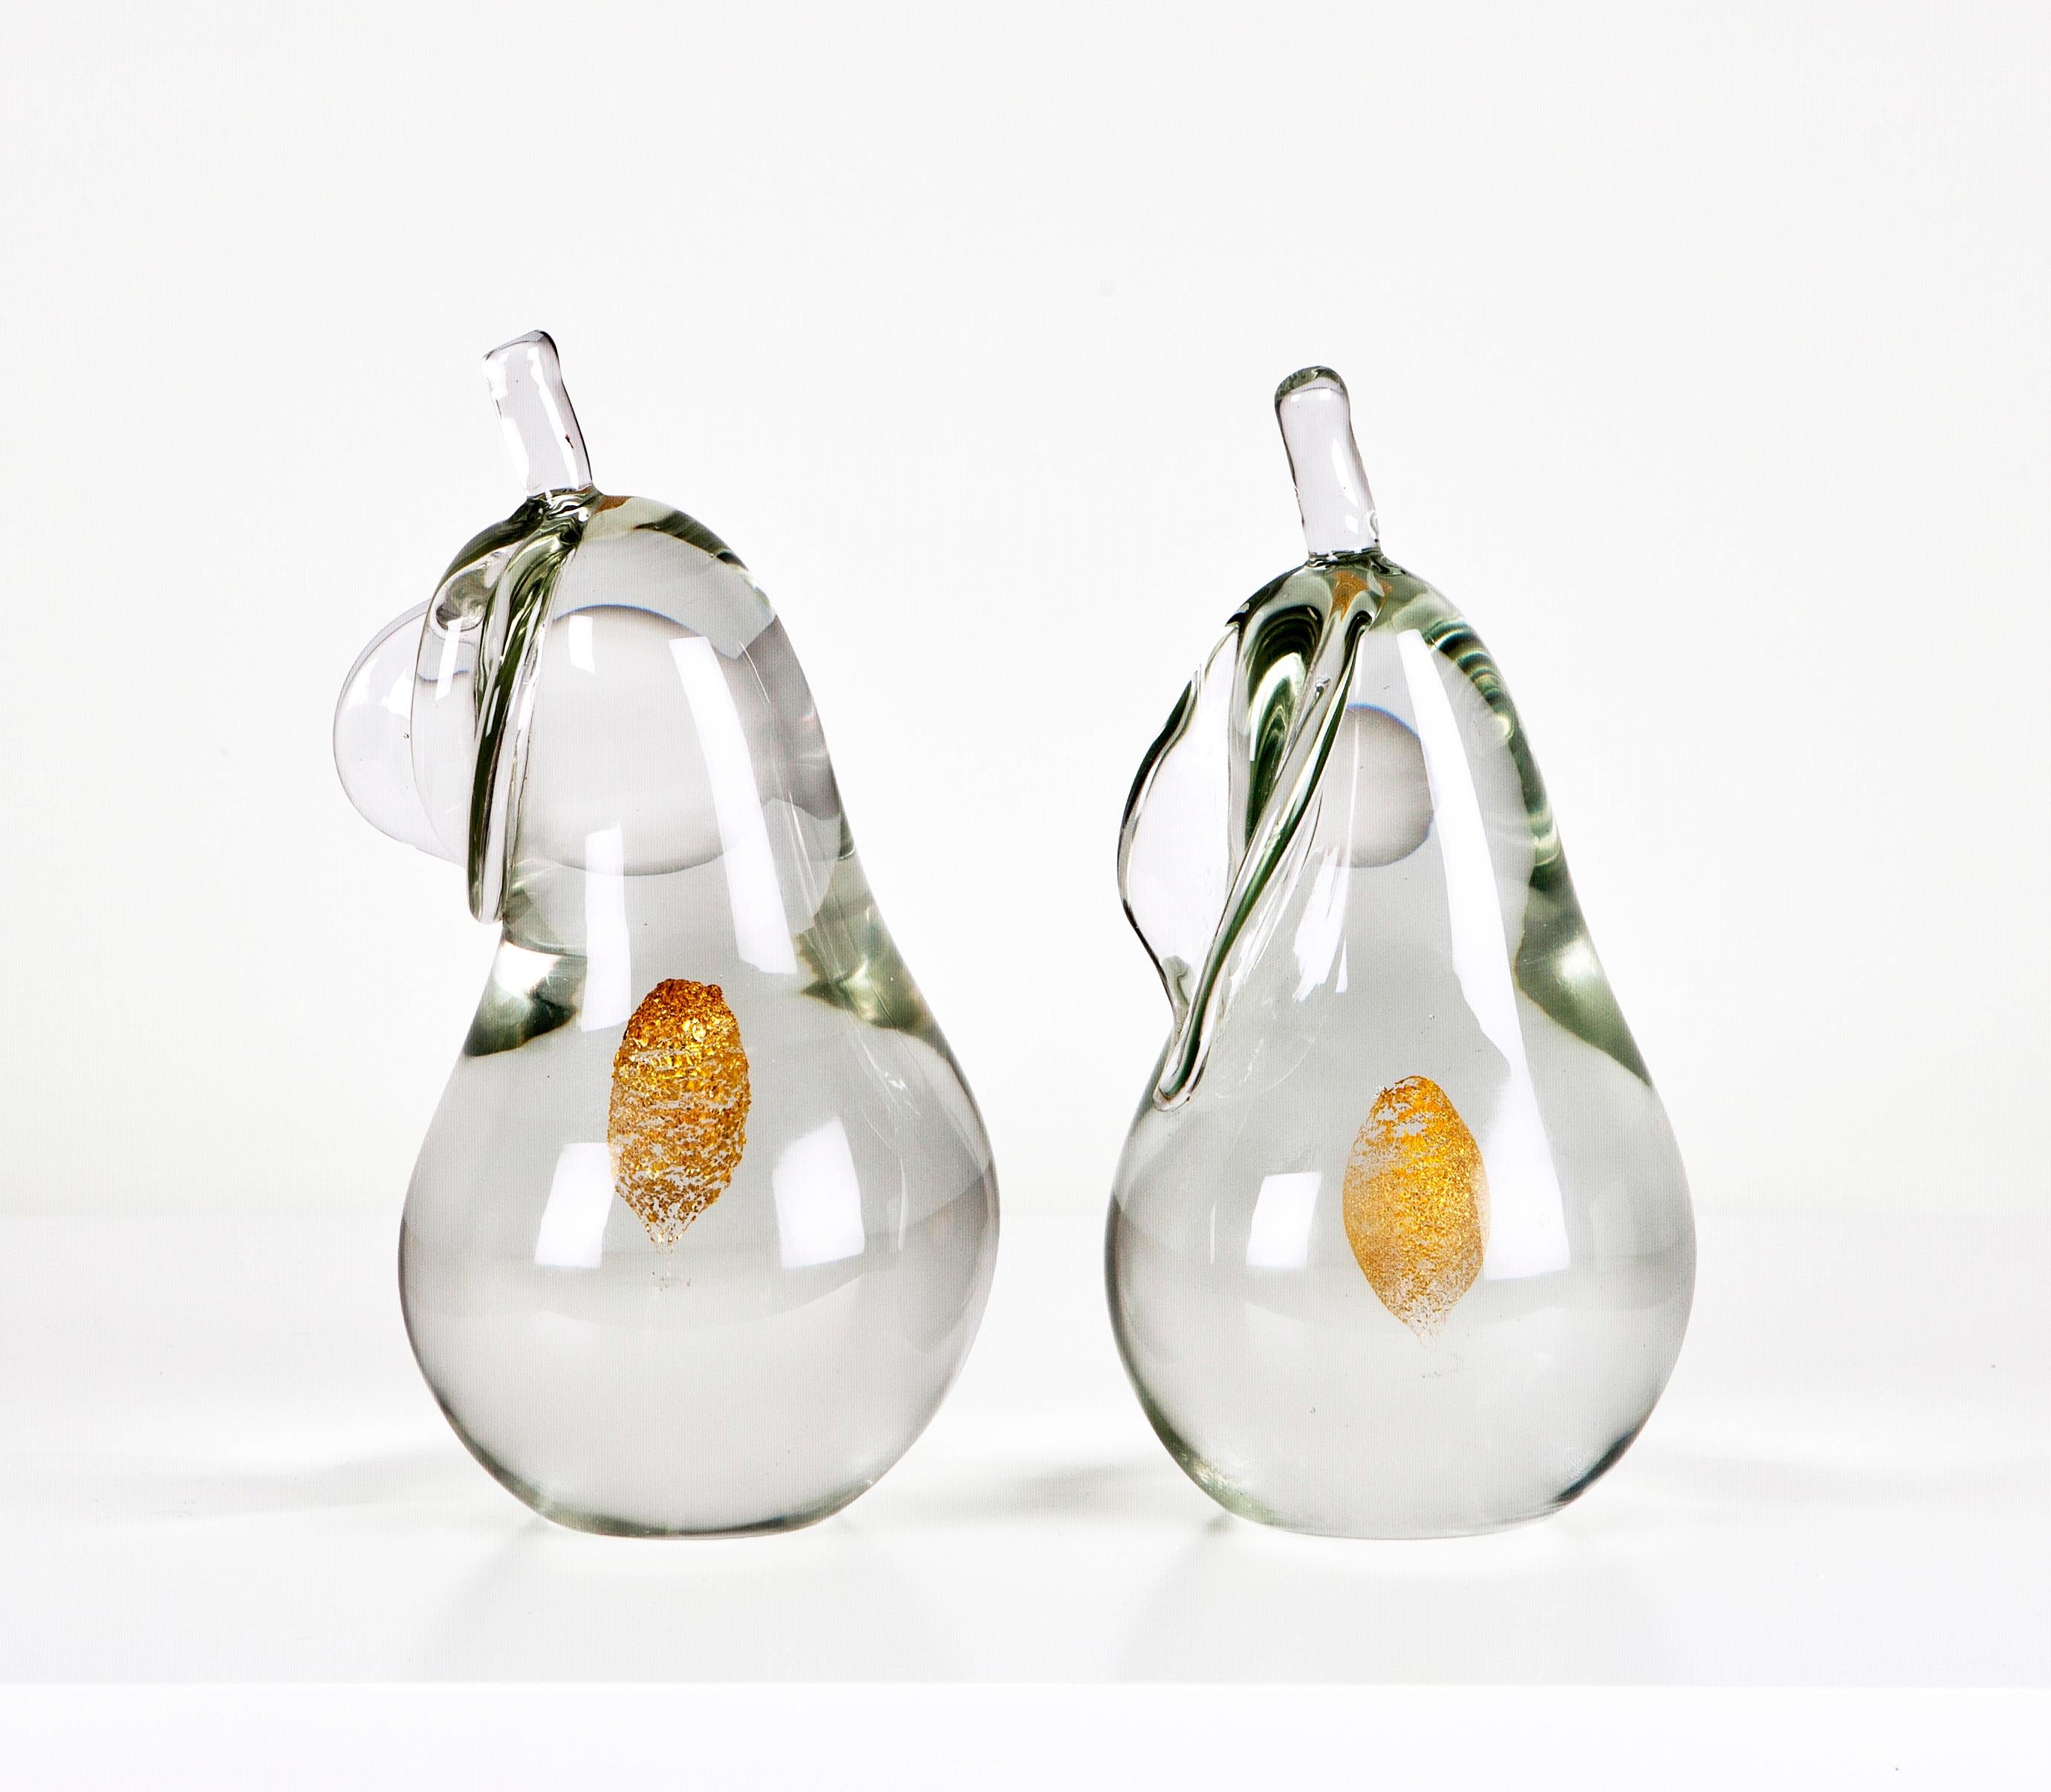 Pair of crystal pears and gold dust by Antonio da Ros.

Pair of glass pears and gold dust by Antonio da Ros for Cenedese Murano. Italy, 70s.
Excellent condition used with slight traces of age and use
Dimensions:
H 7.48 in.